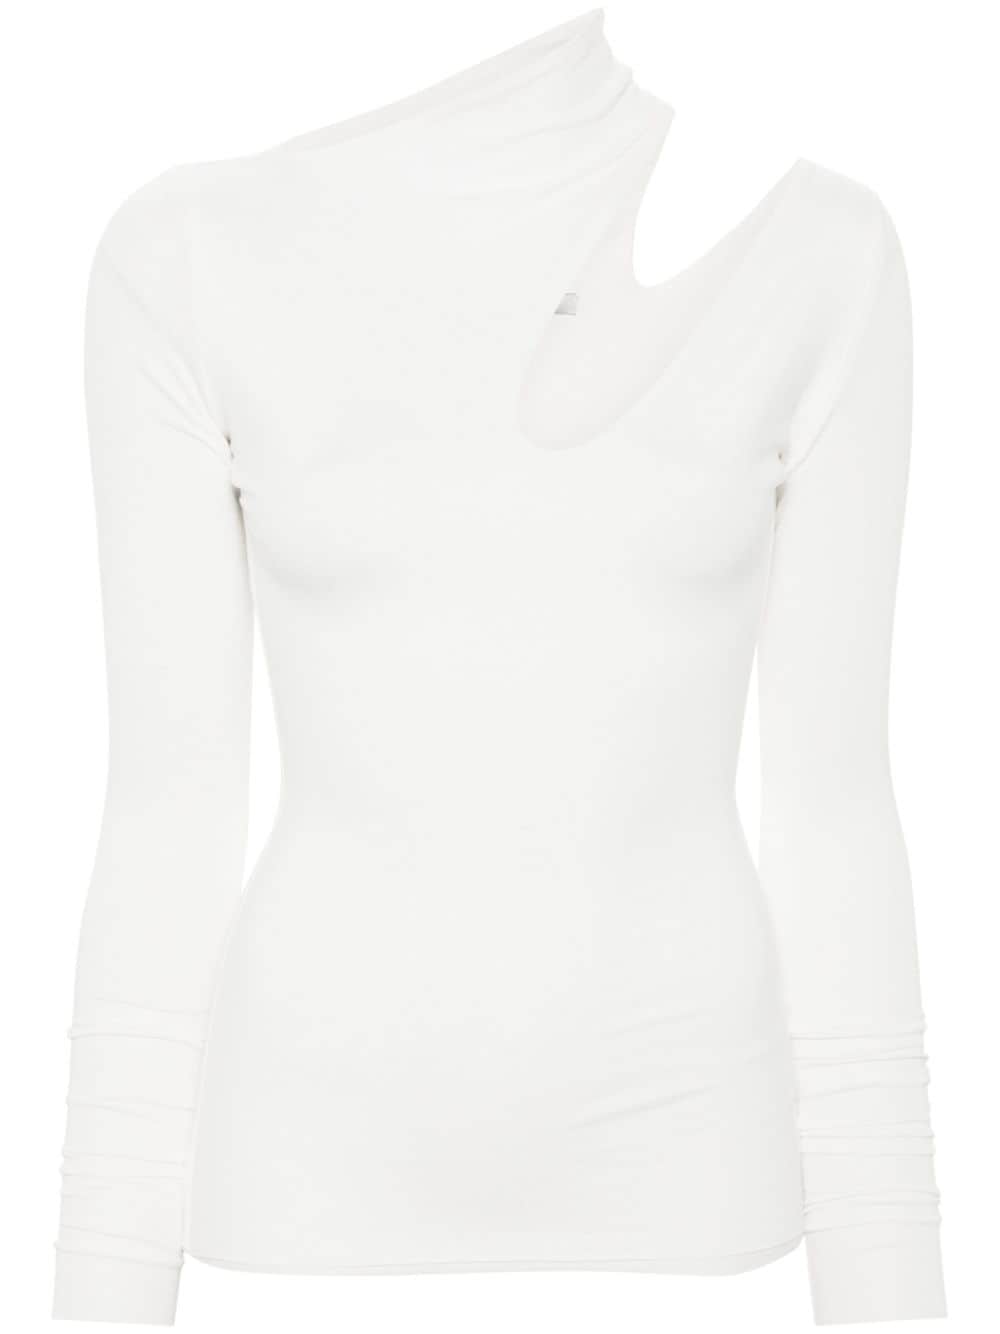 Bambina cut-out detail top